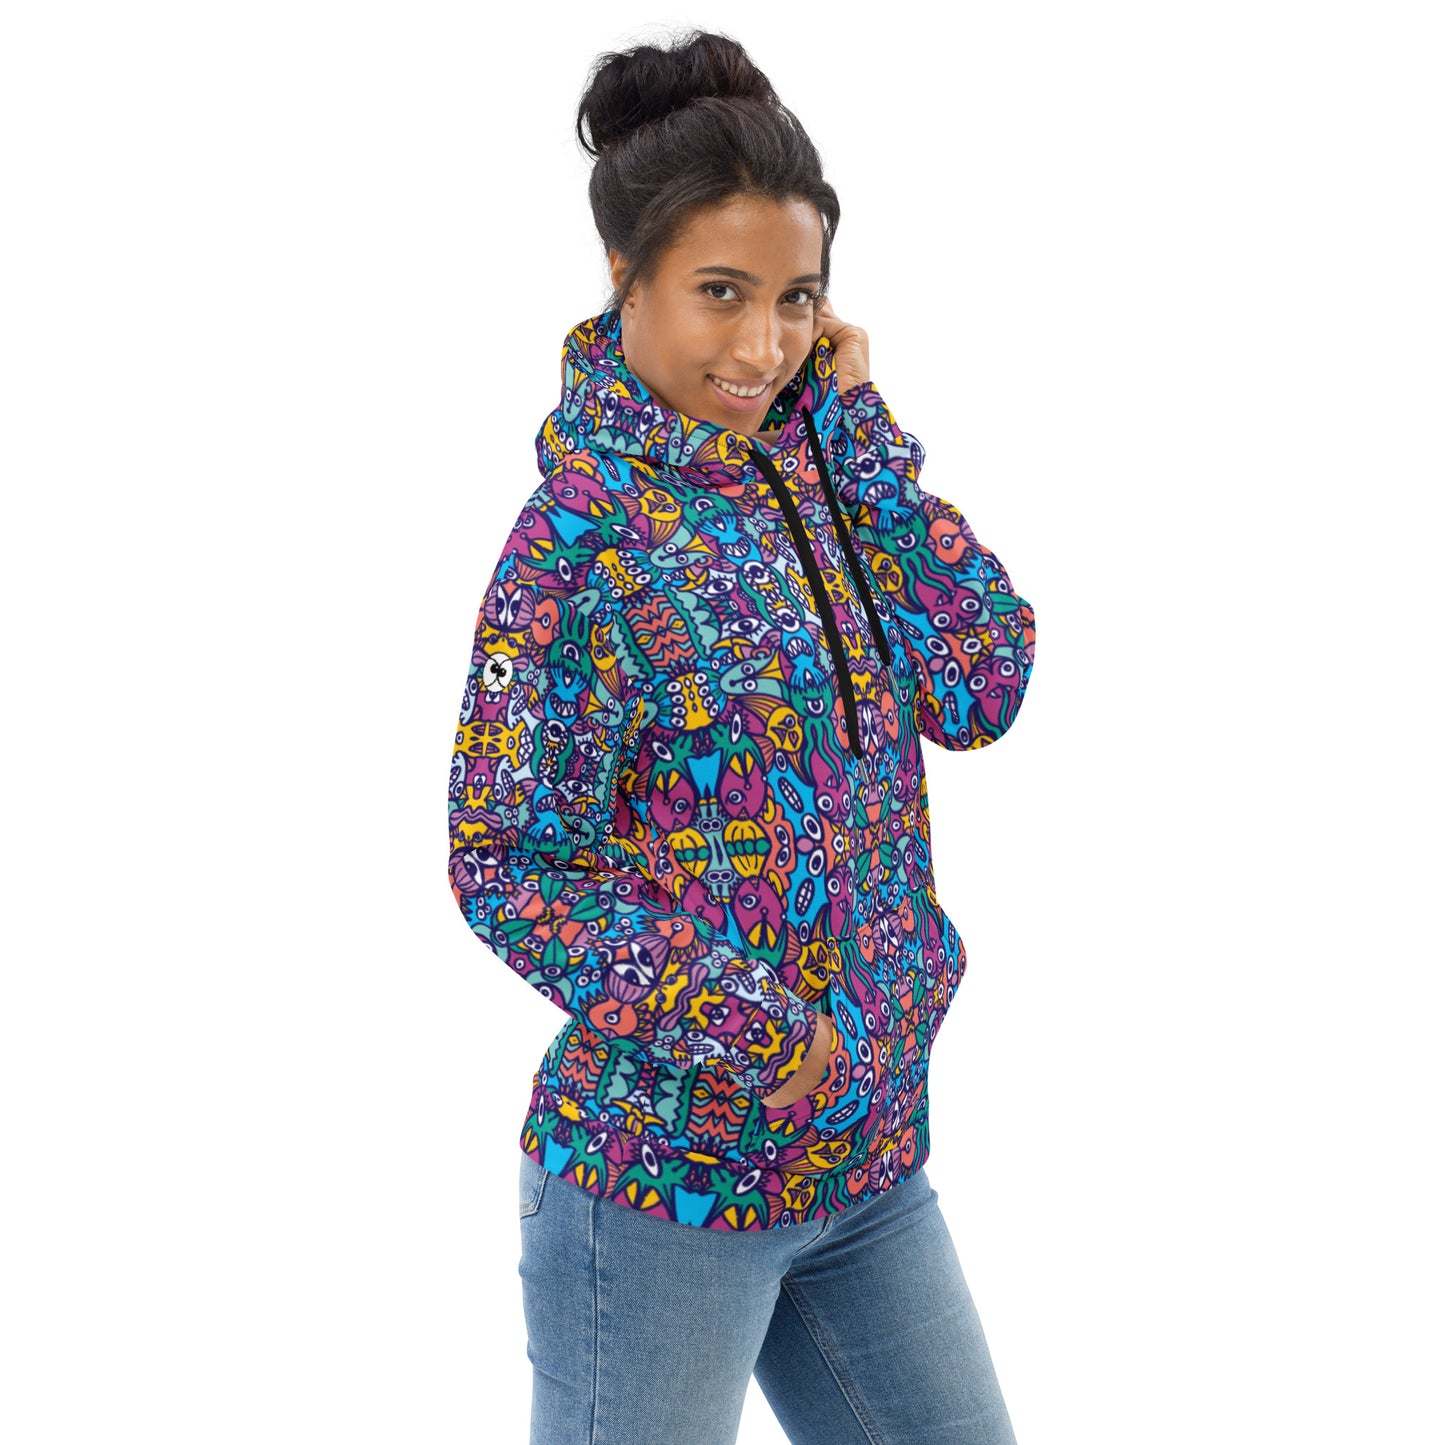 Whimsical design featuring multicolor critters from another world Unisex Hoodie. Overview